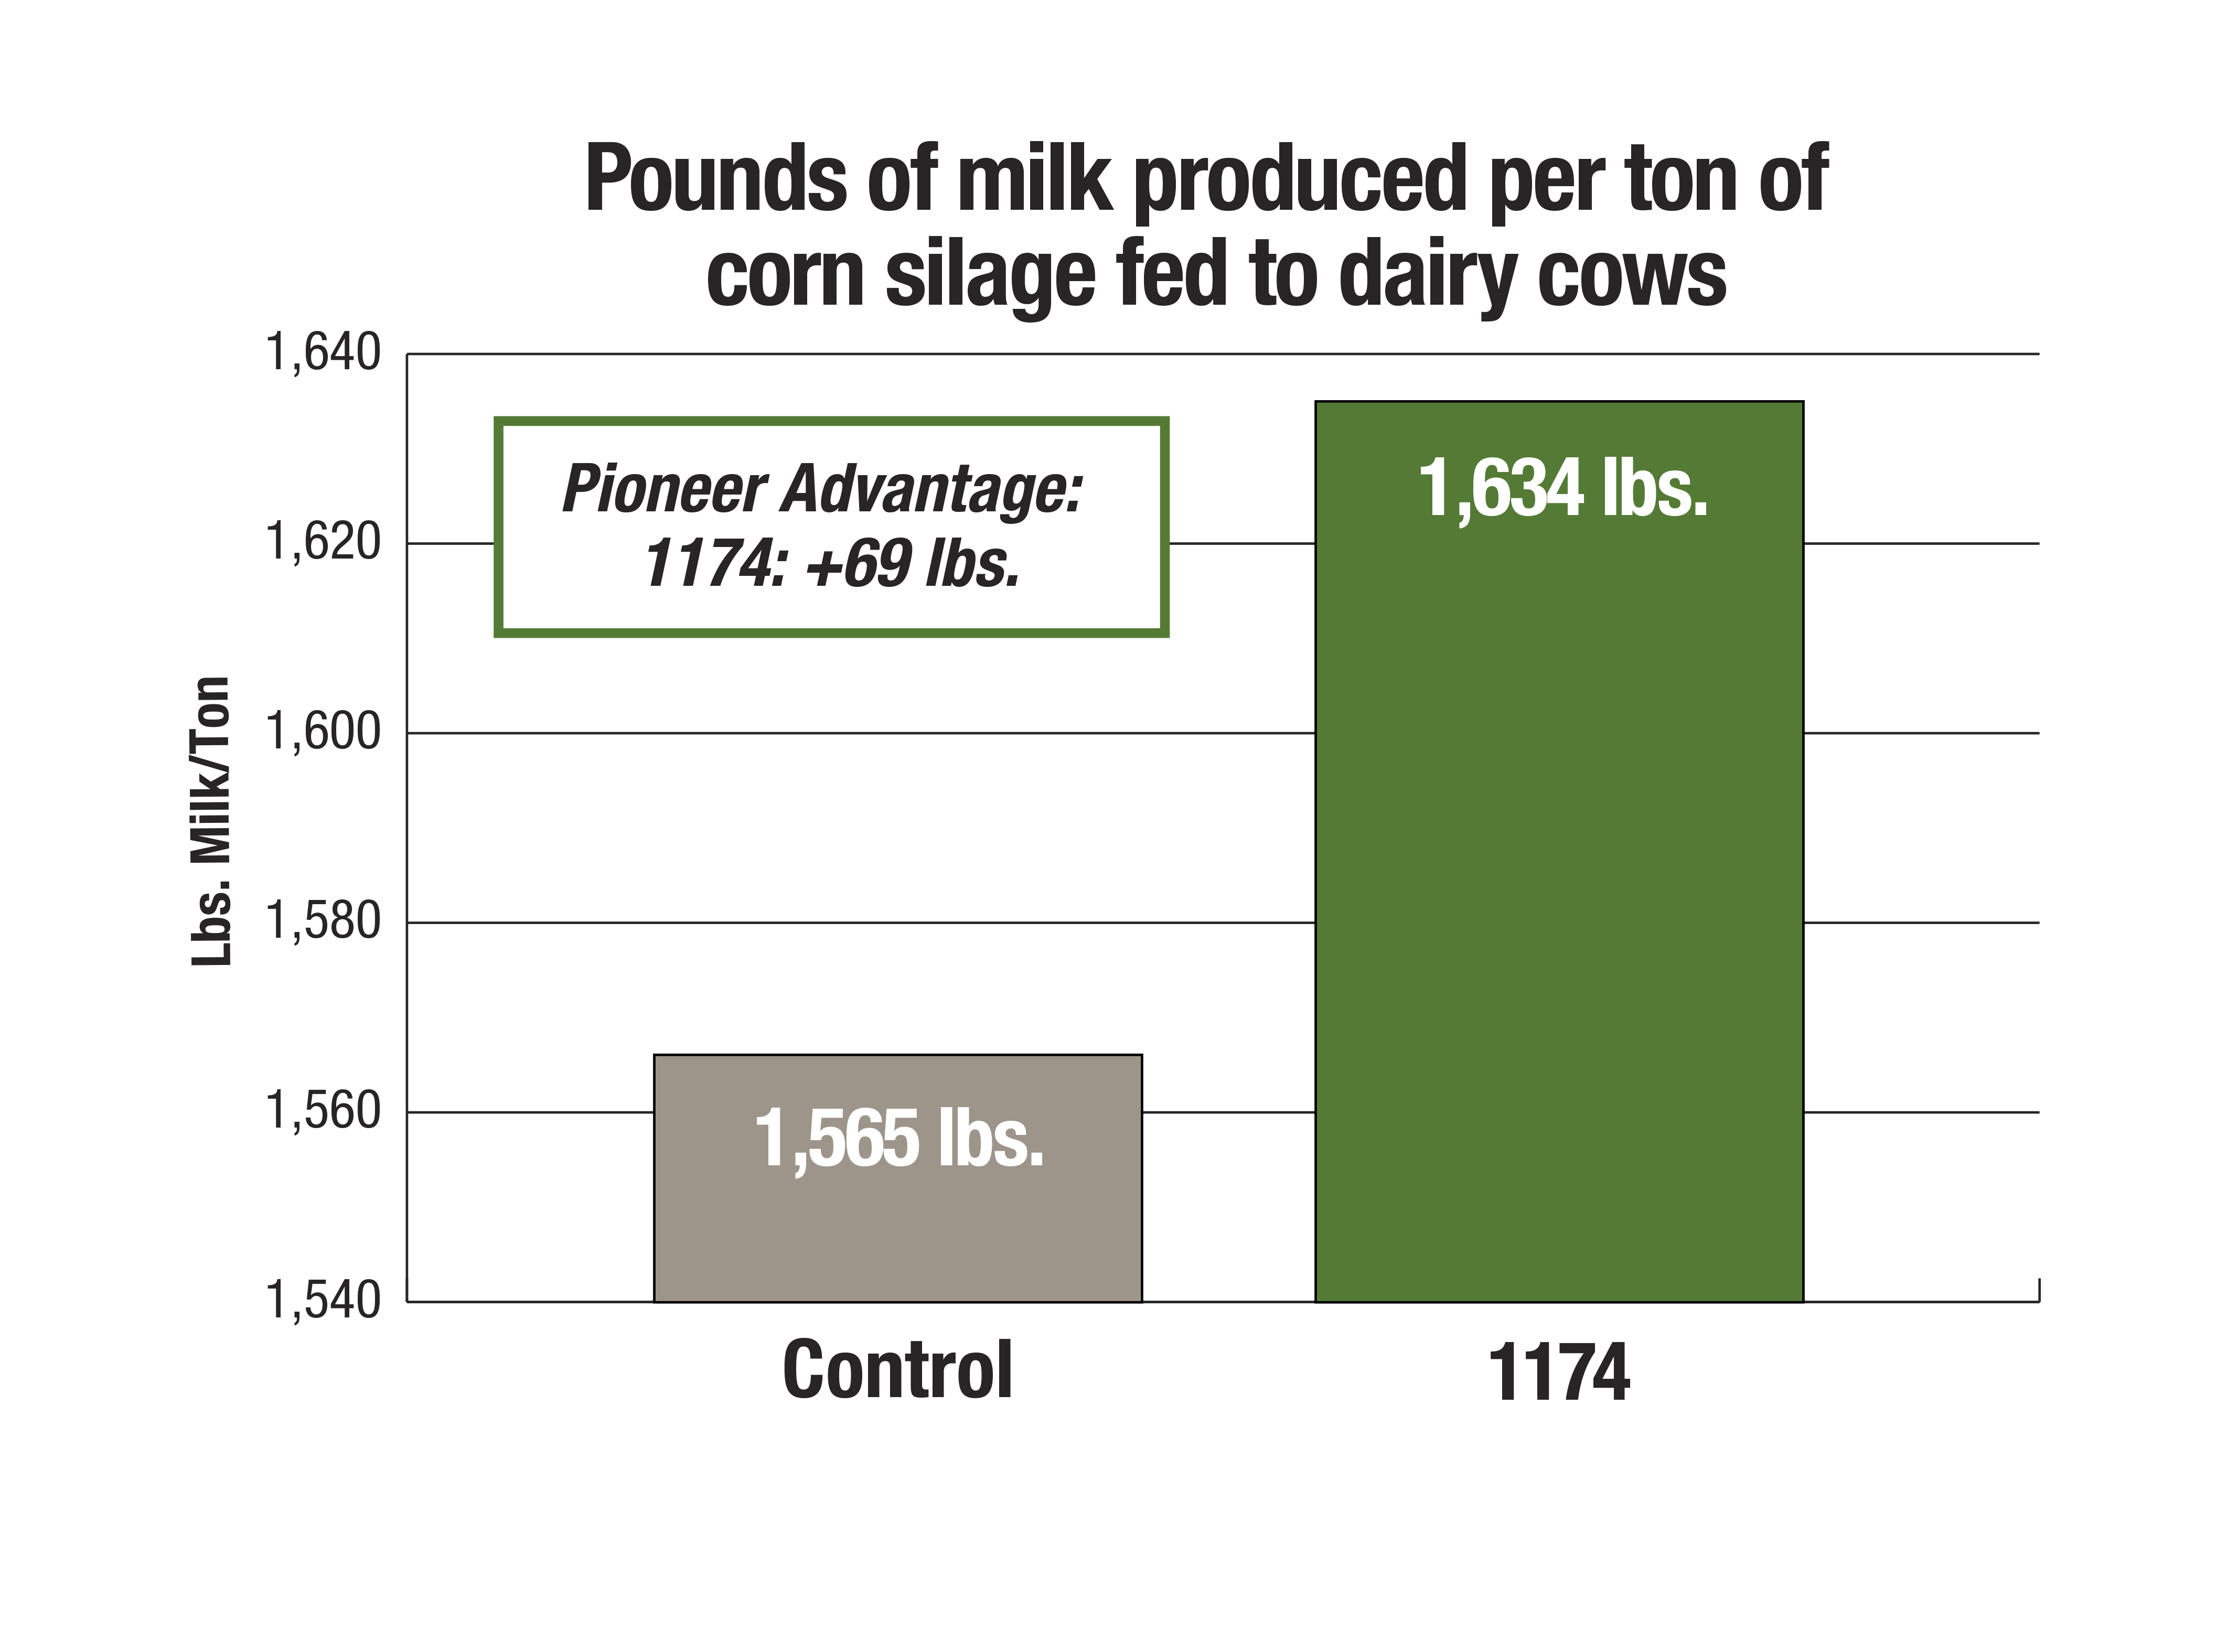 Pounds of milk produced per ton of corn silage fed to dairy cows